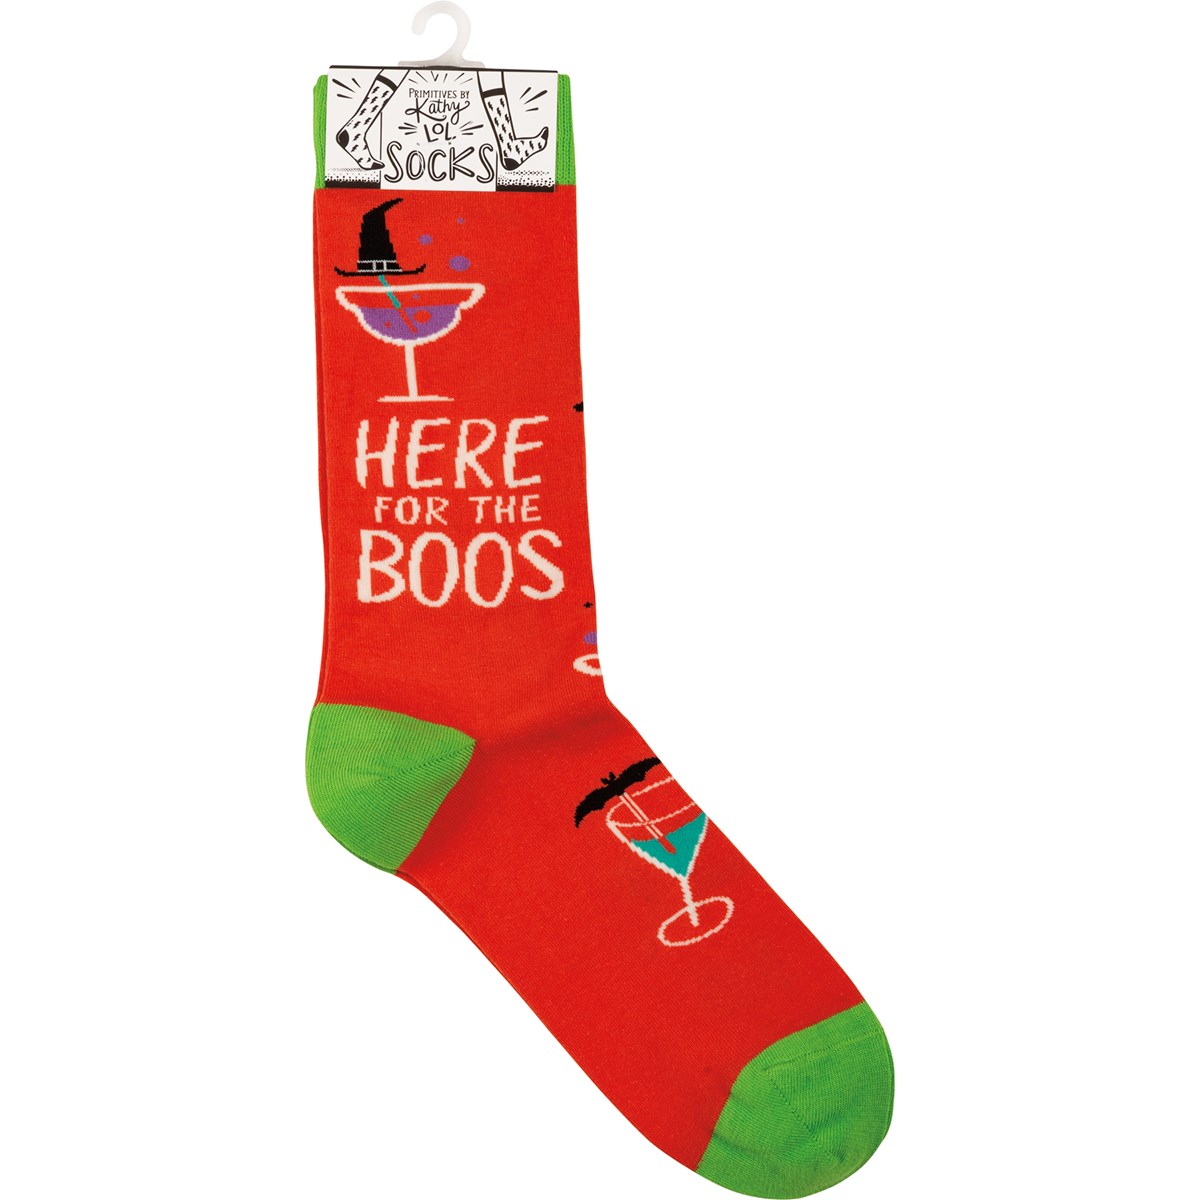 Here For The Boos Socks - Cotton, Nylon, Spandex